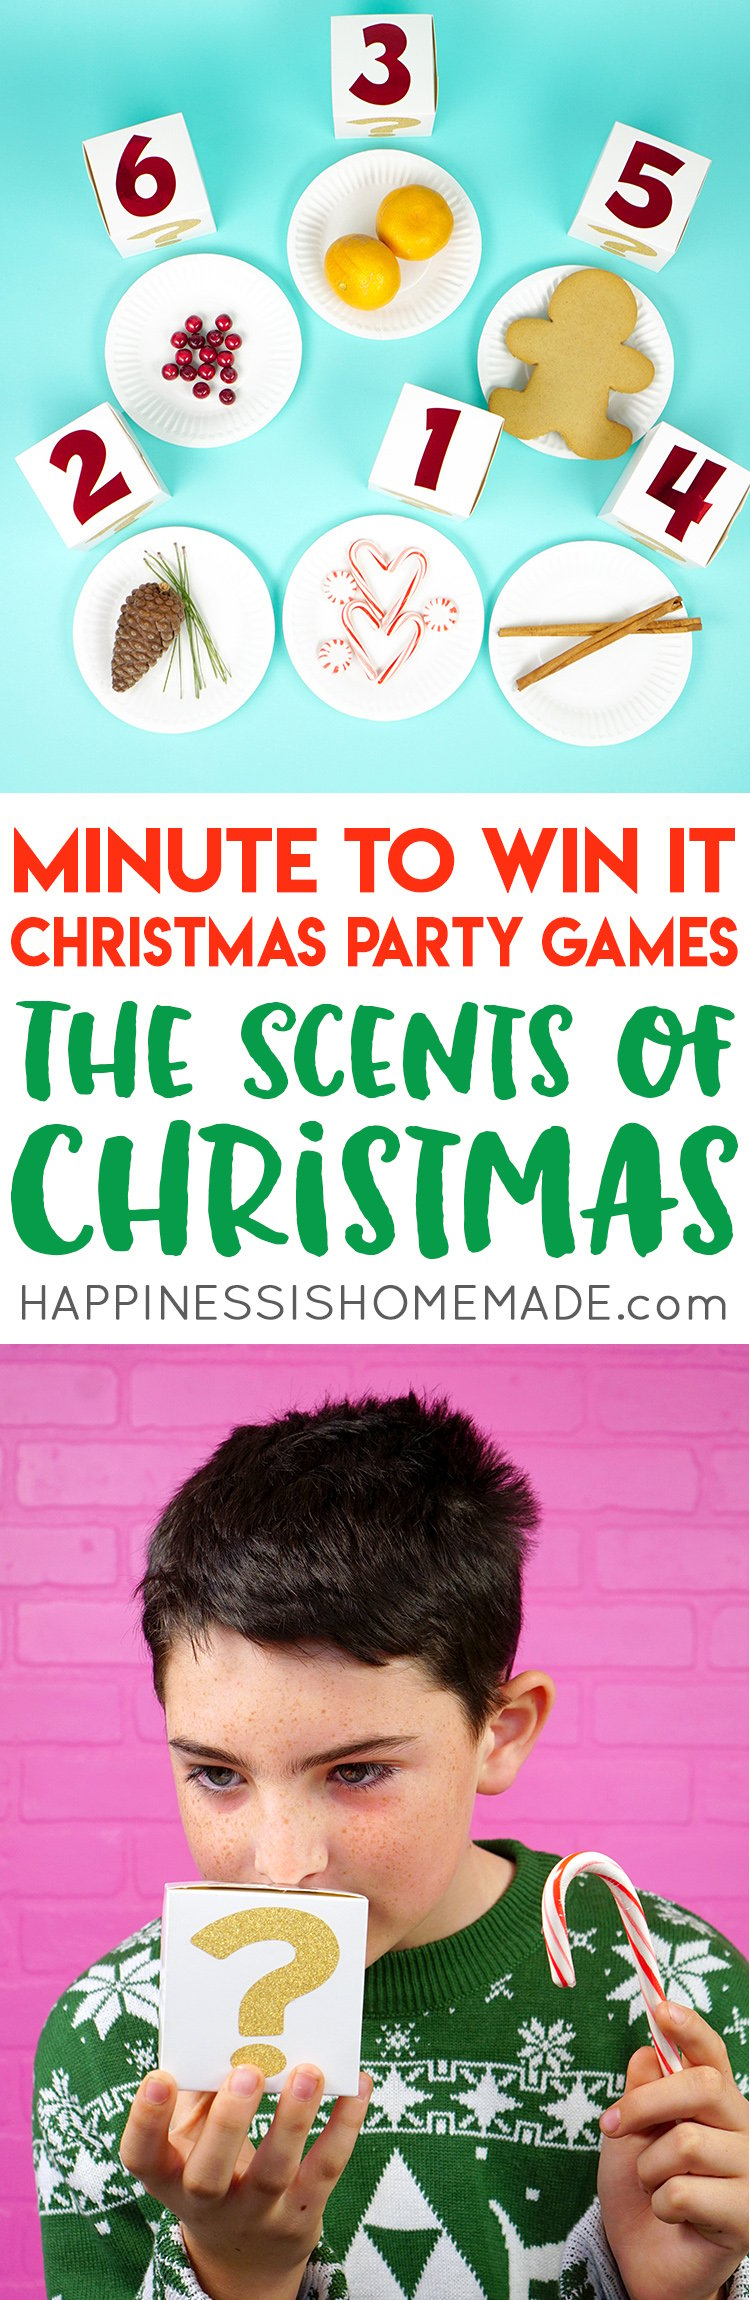 minute to win it game the scents of christmas